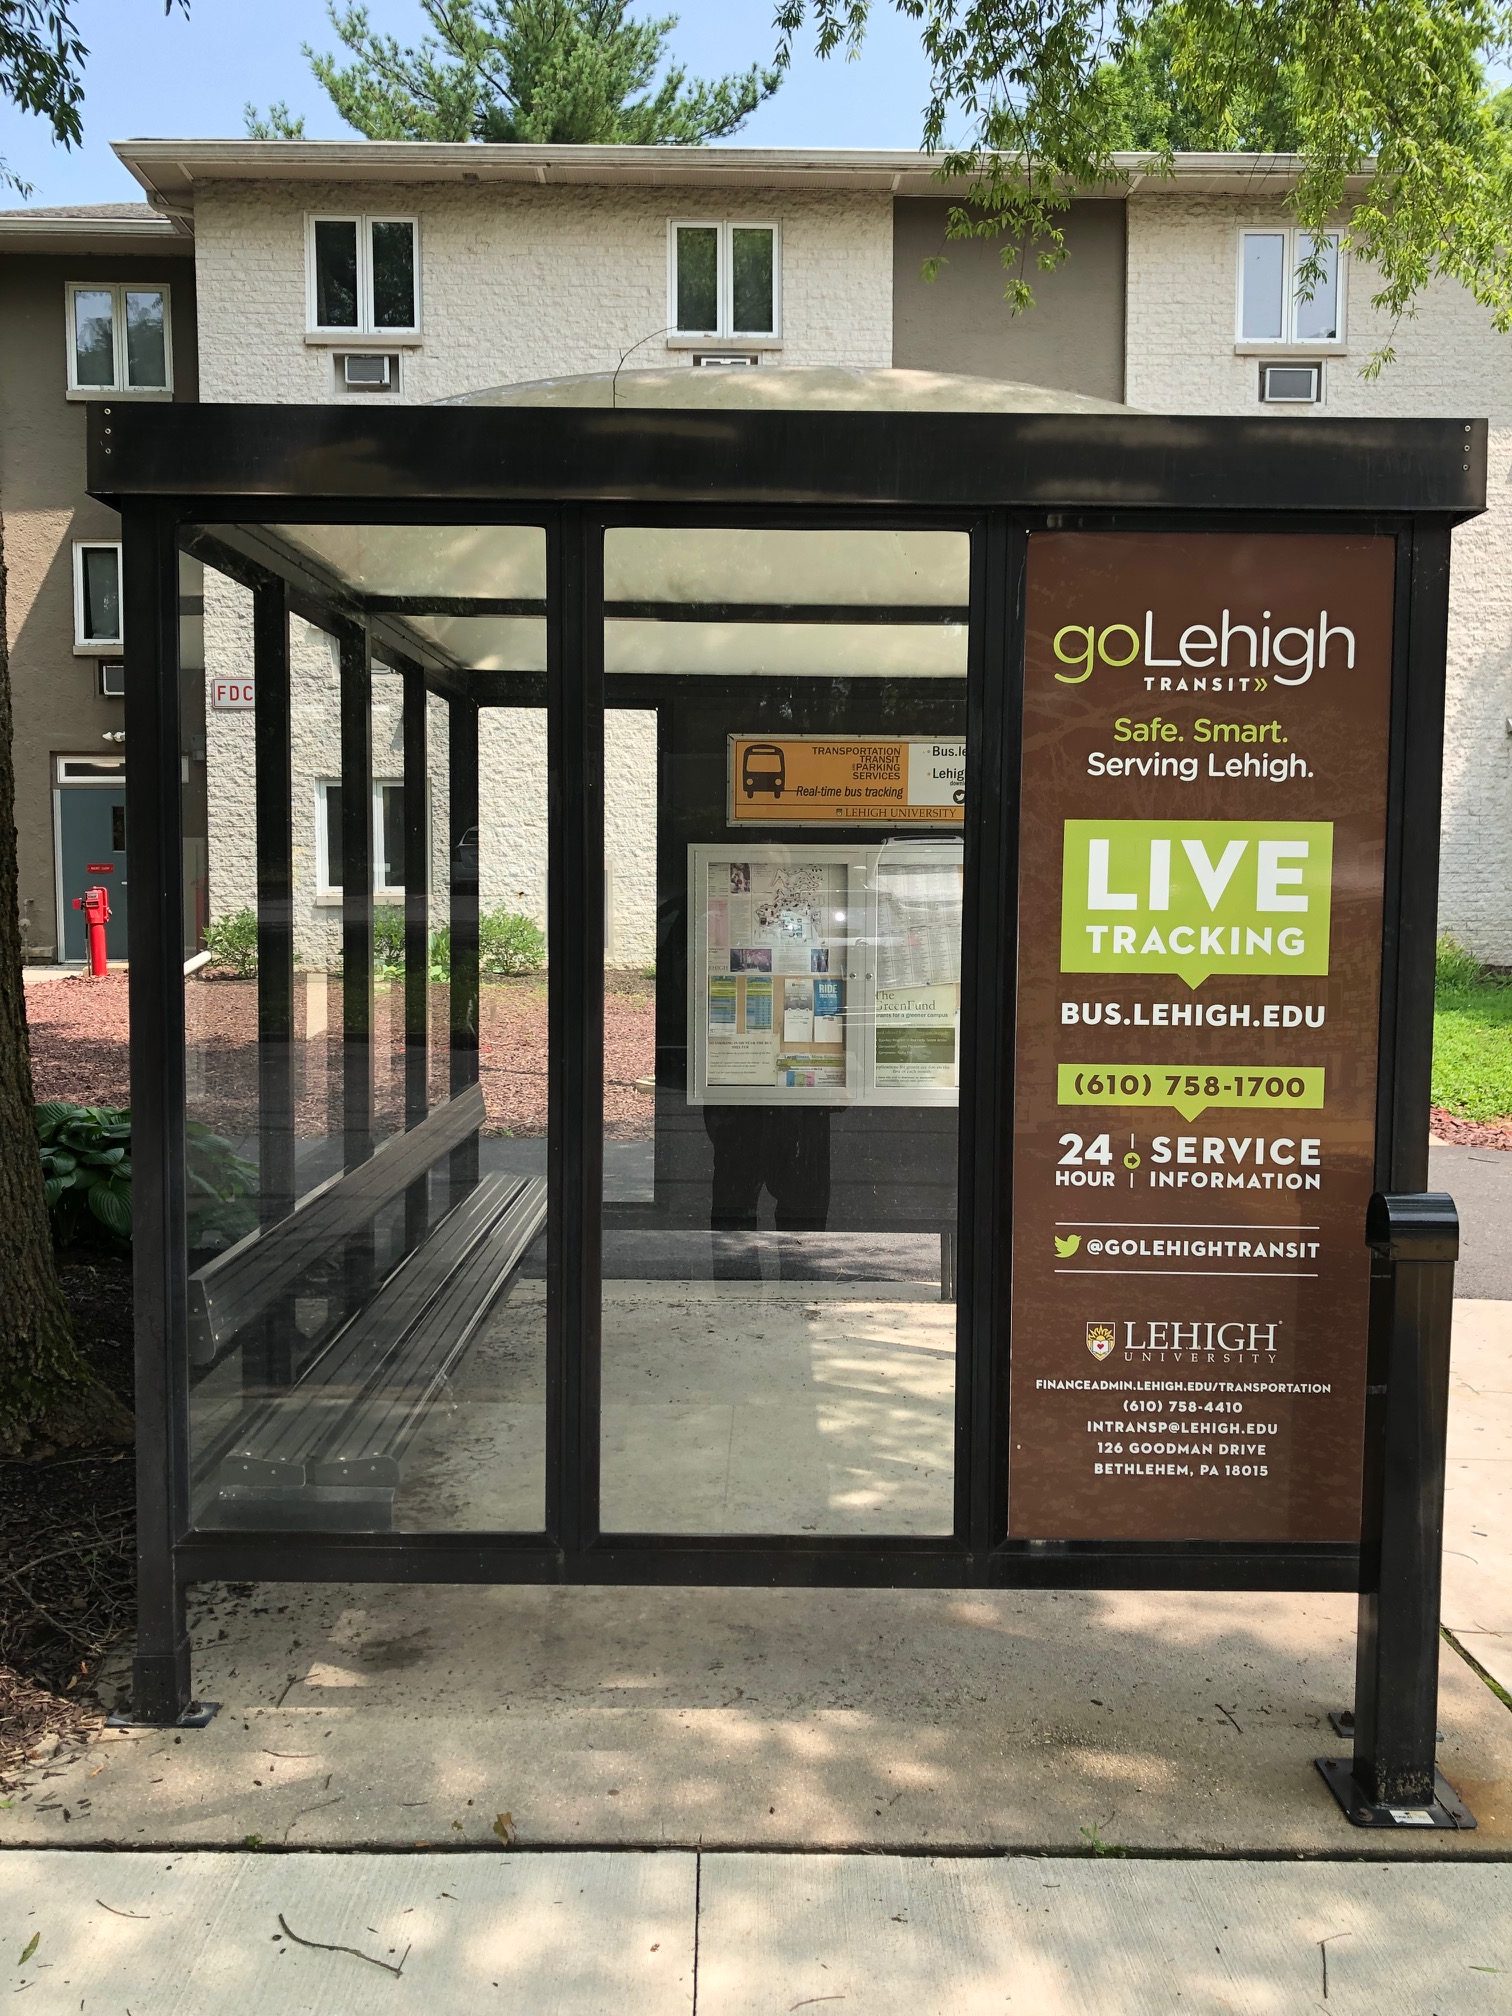 LOCATION DETECTION—With the LehighU Live app, Lehigh University community members can find the closest shuttle bus and track it in real time. Lehigh Transportation Services runs three bus routes and promotes the app on its shuttles and bus shelters.